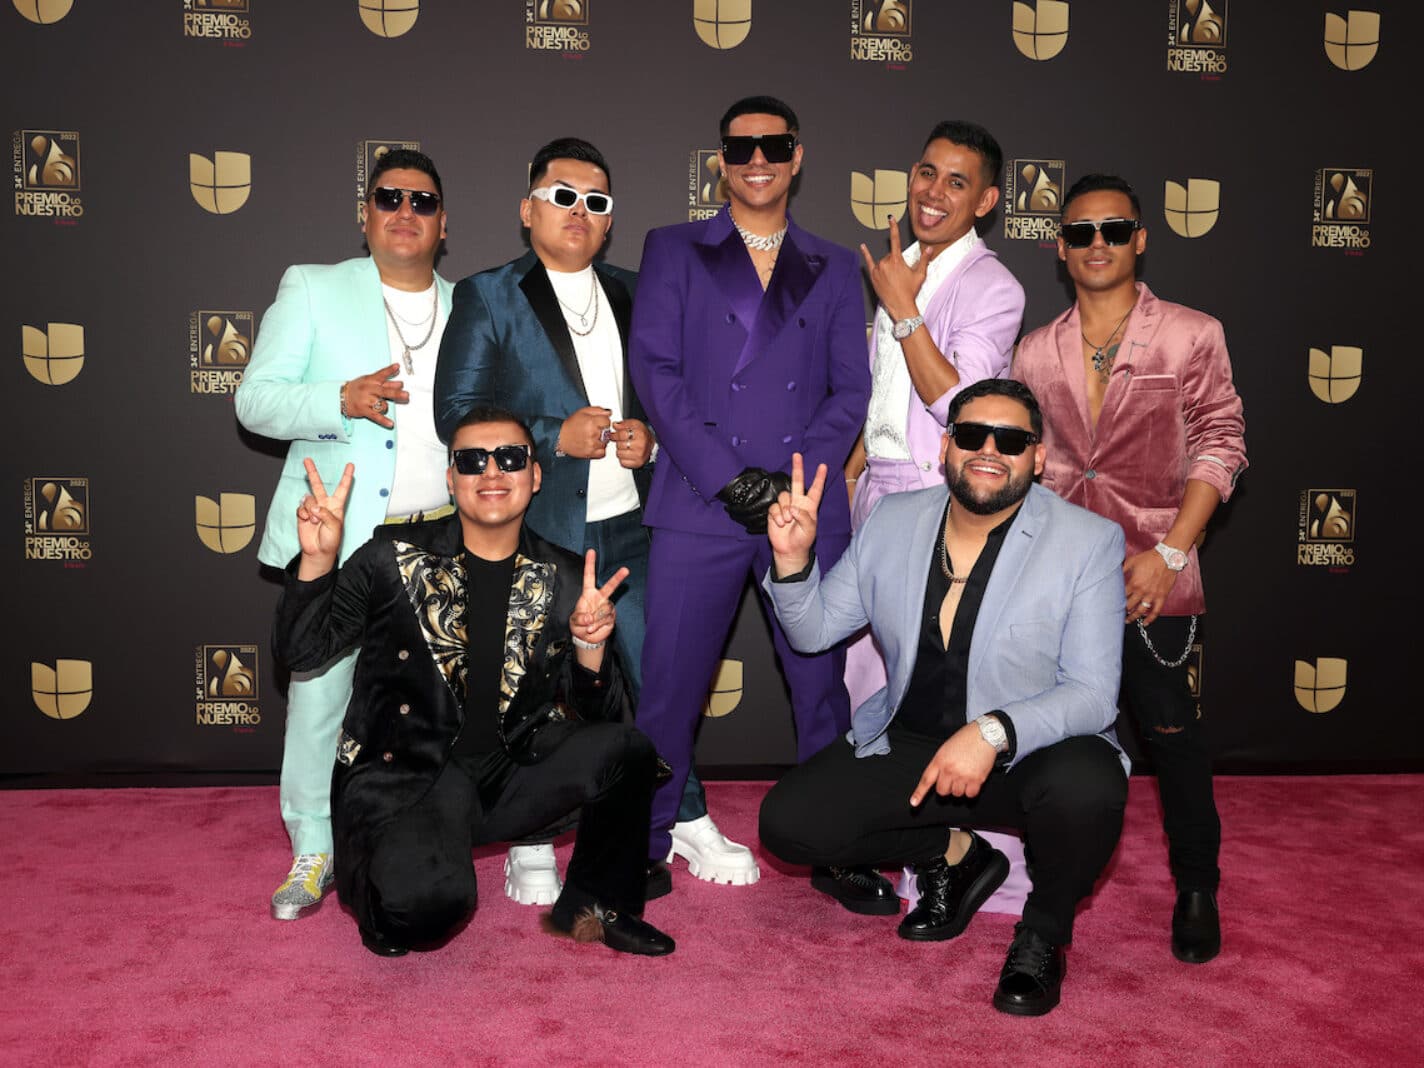 Grupo Firme Headed to NFL Halftime Show in Mexico — Here’s Why That Matters